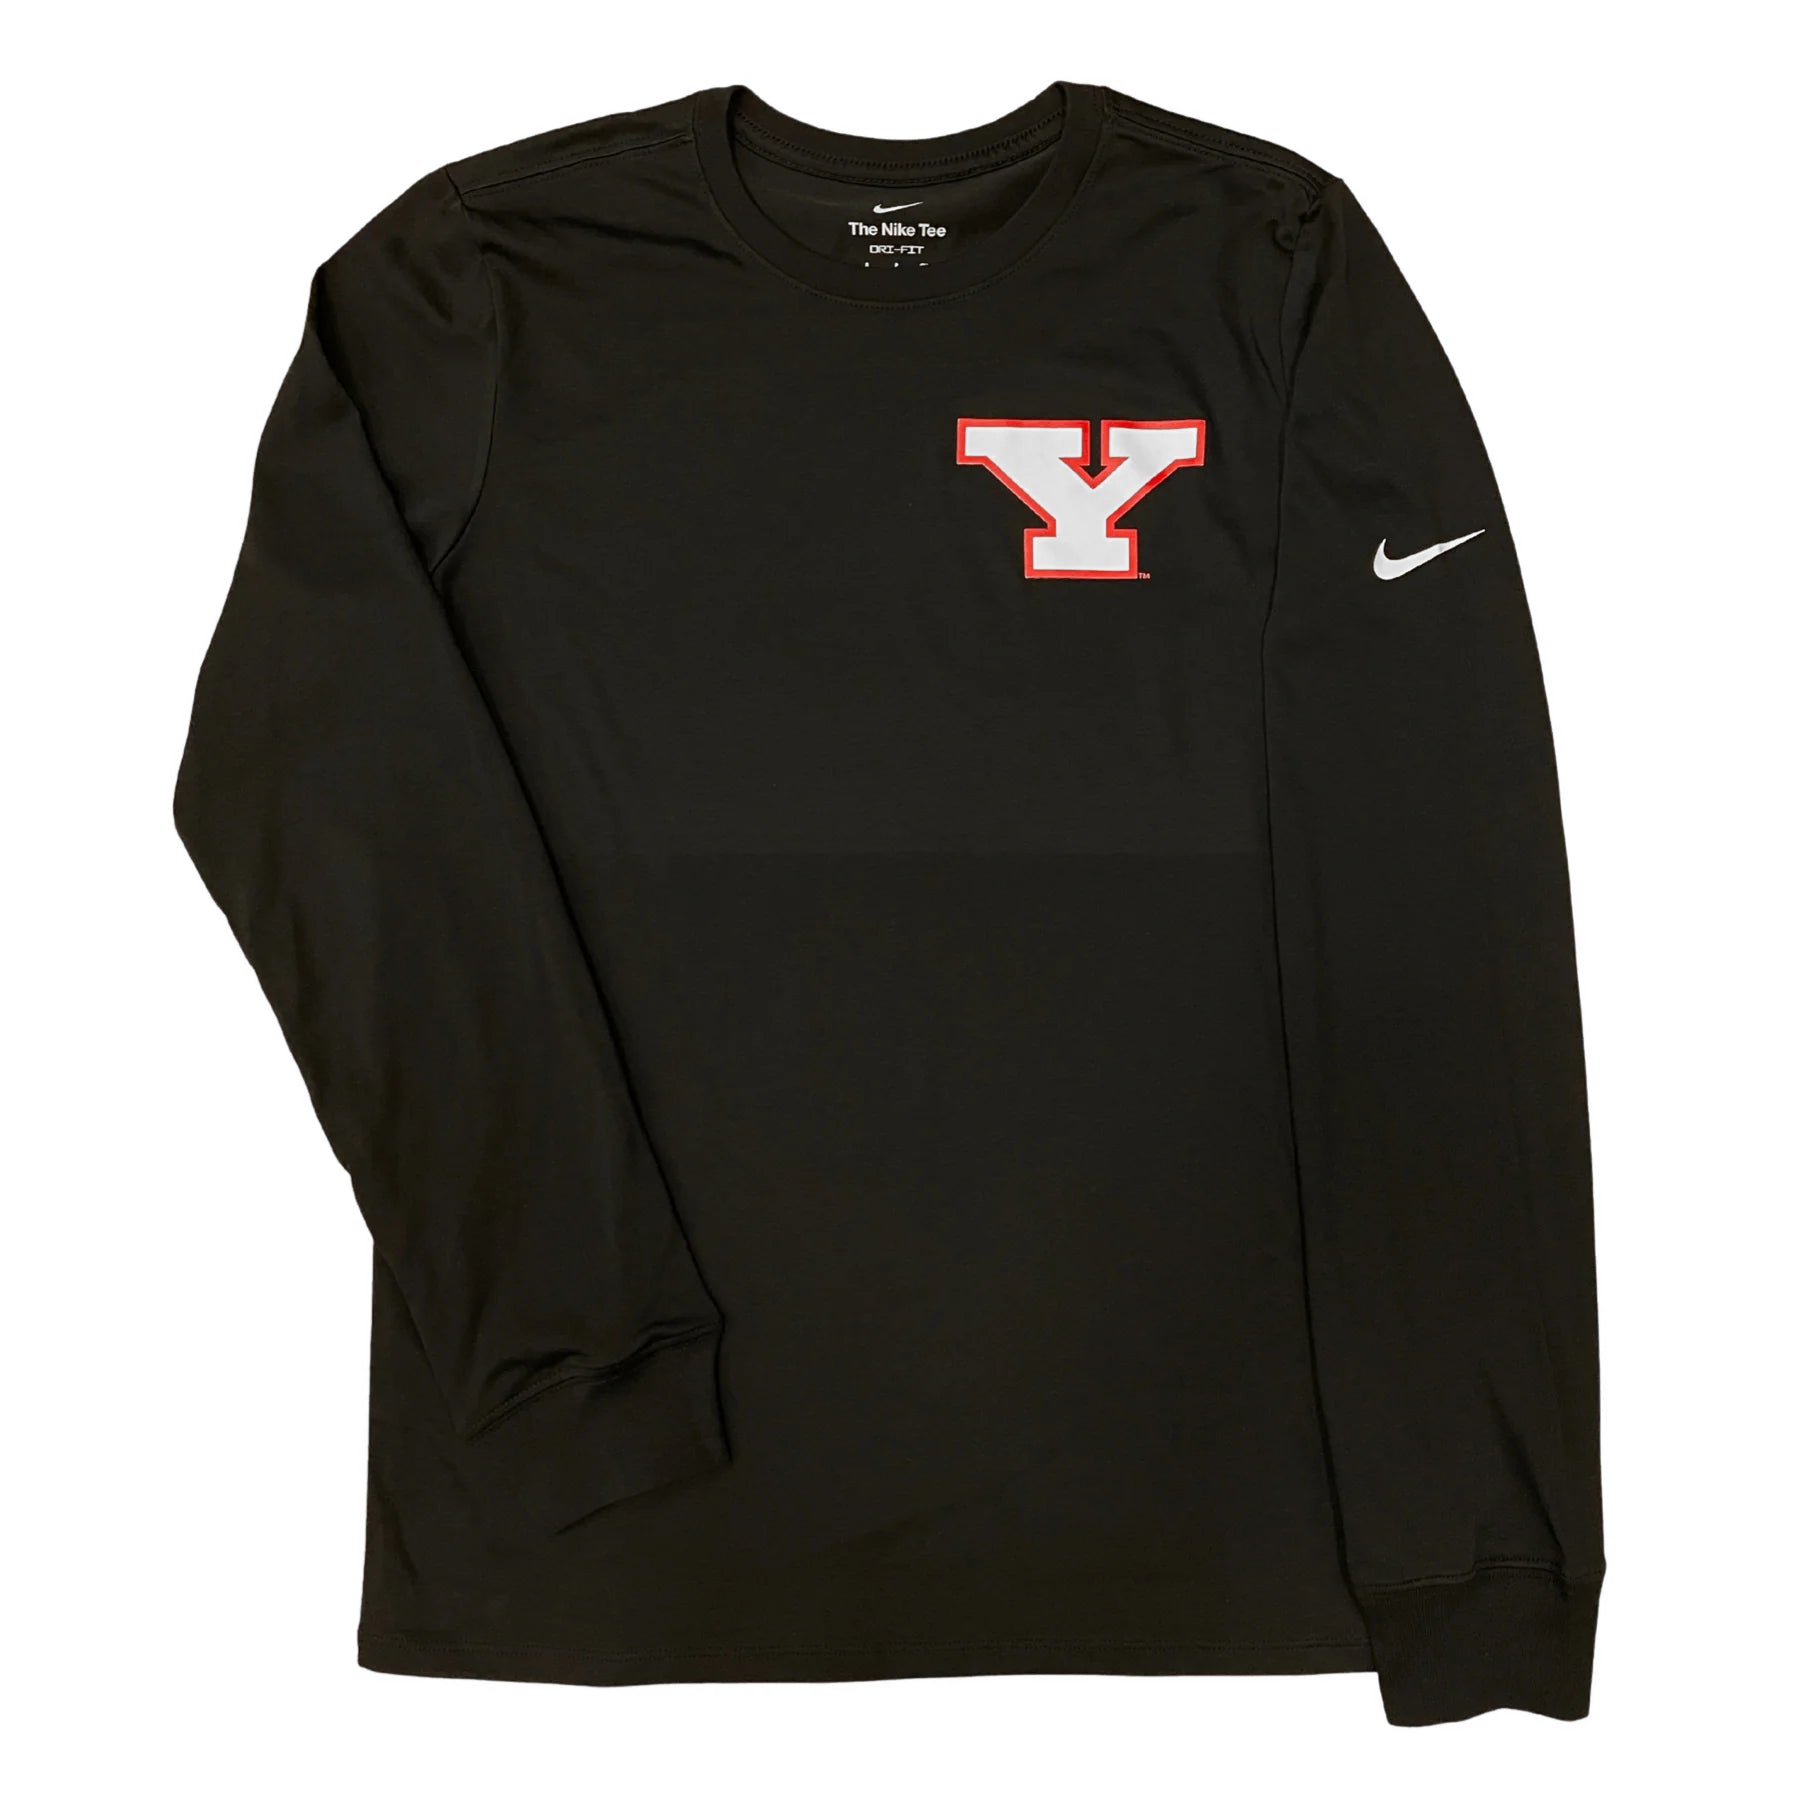 Nike Youngstown State Block Y T-Shirt (Black) Long Sleeve